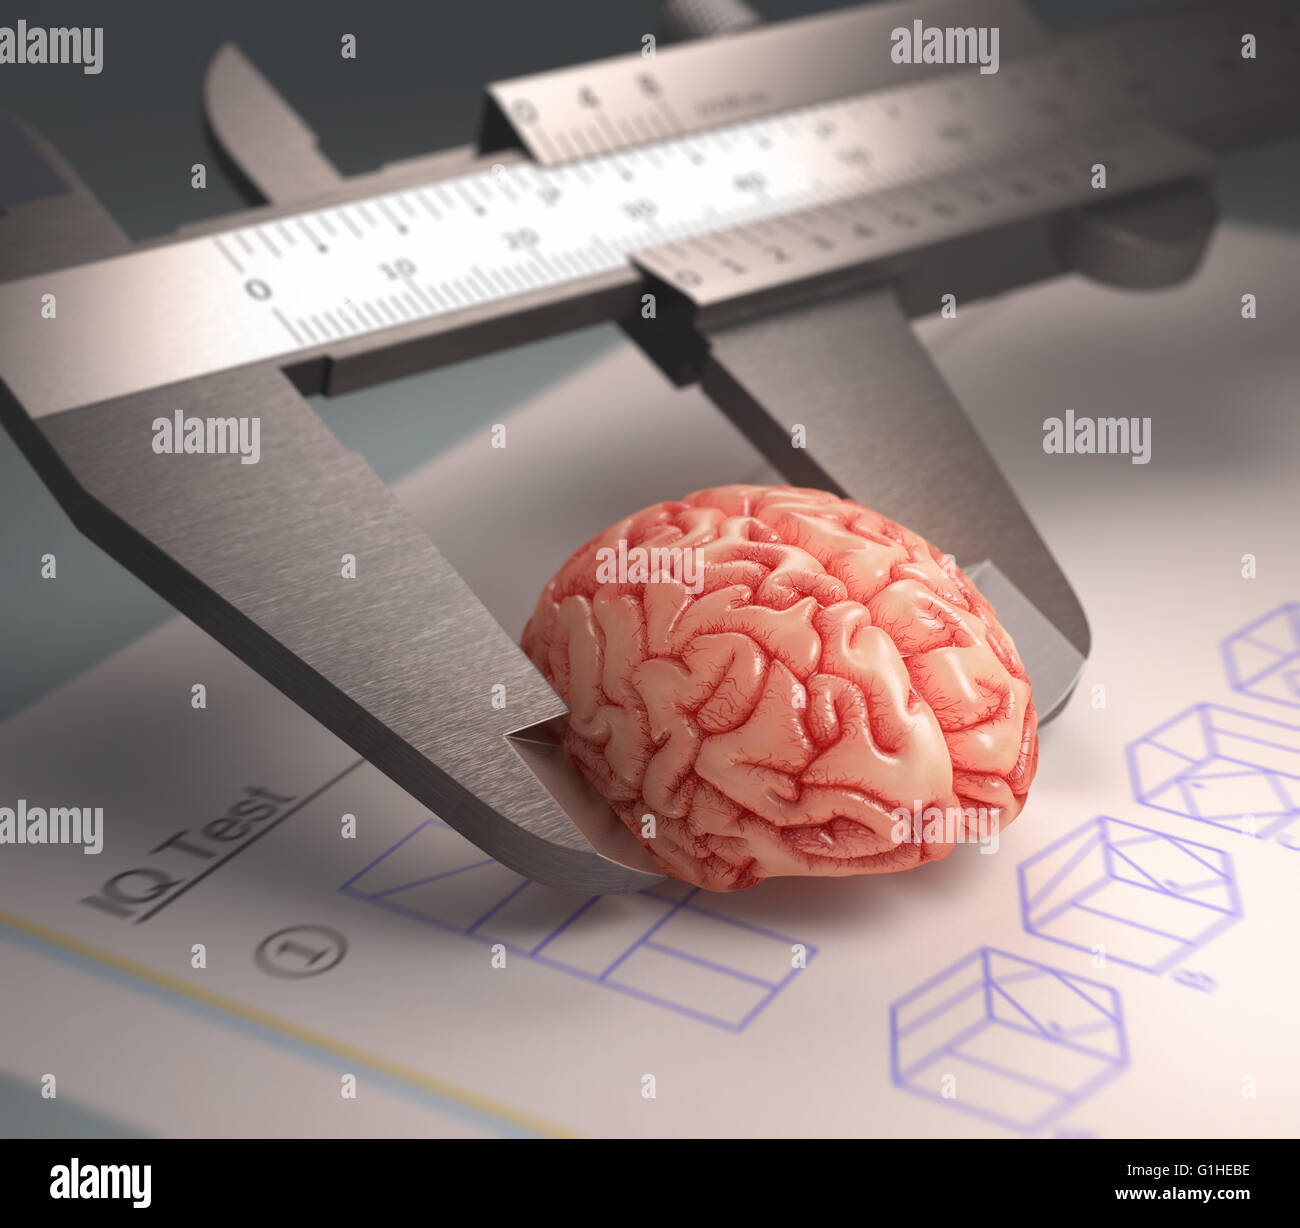 Caliper ruler measuring a human brain. Over the table a IQ Test in a concept of the human intelligence. Stock Photo